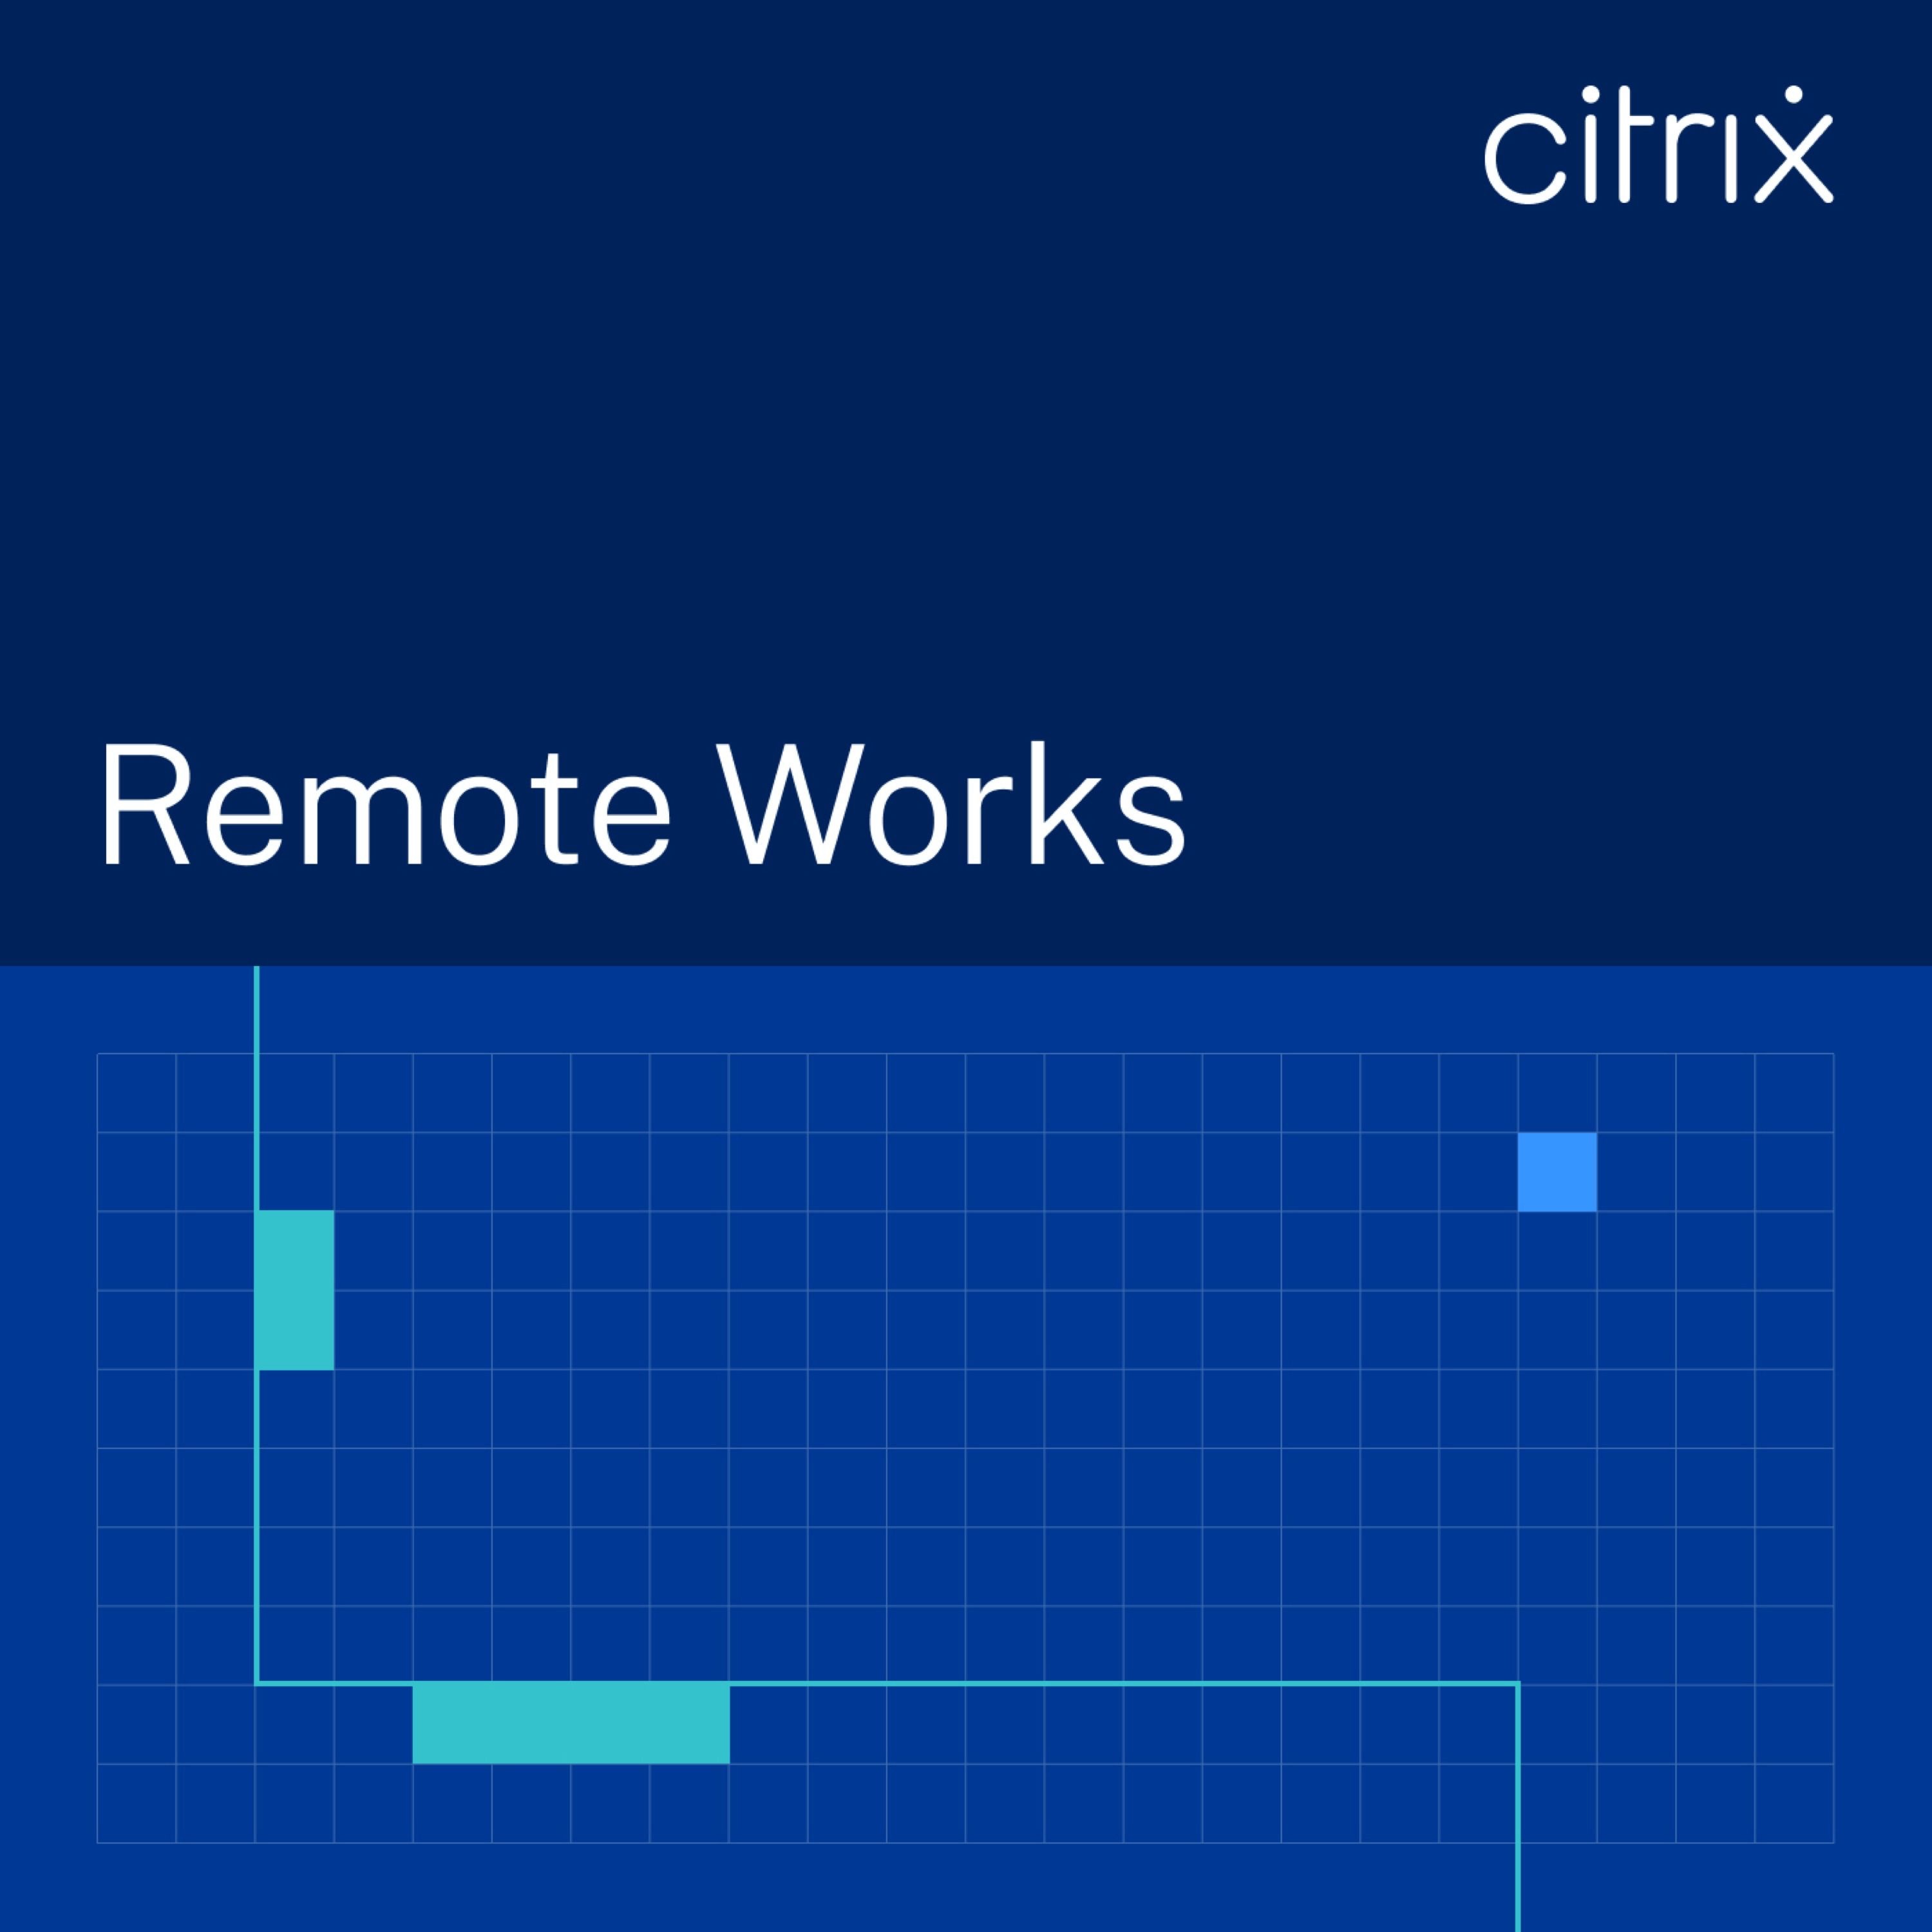 Introducing Remote Works